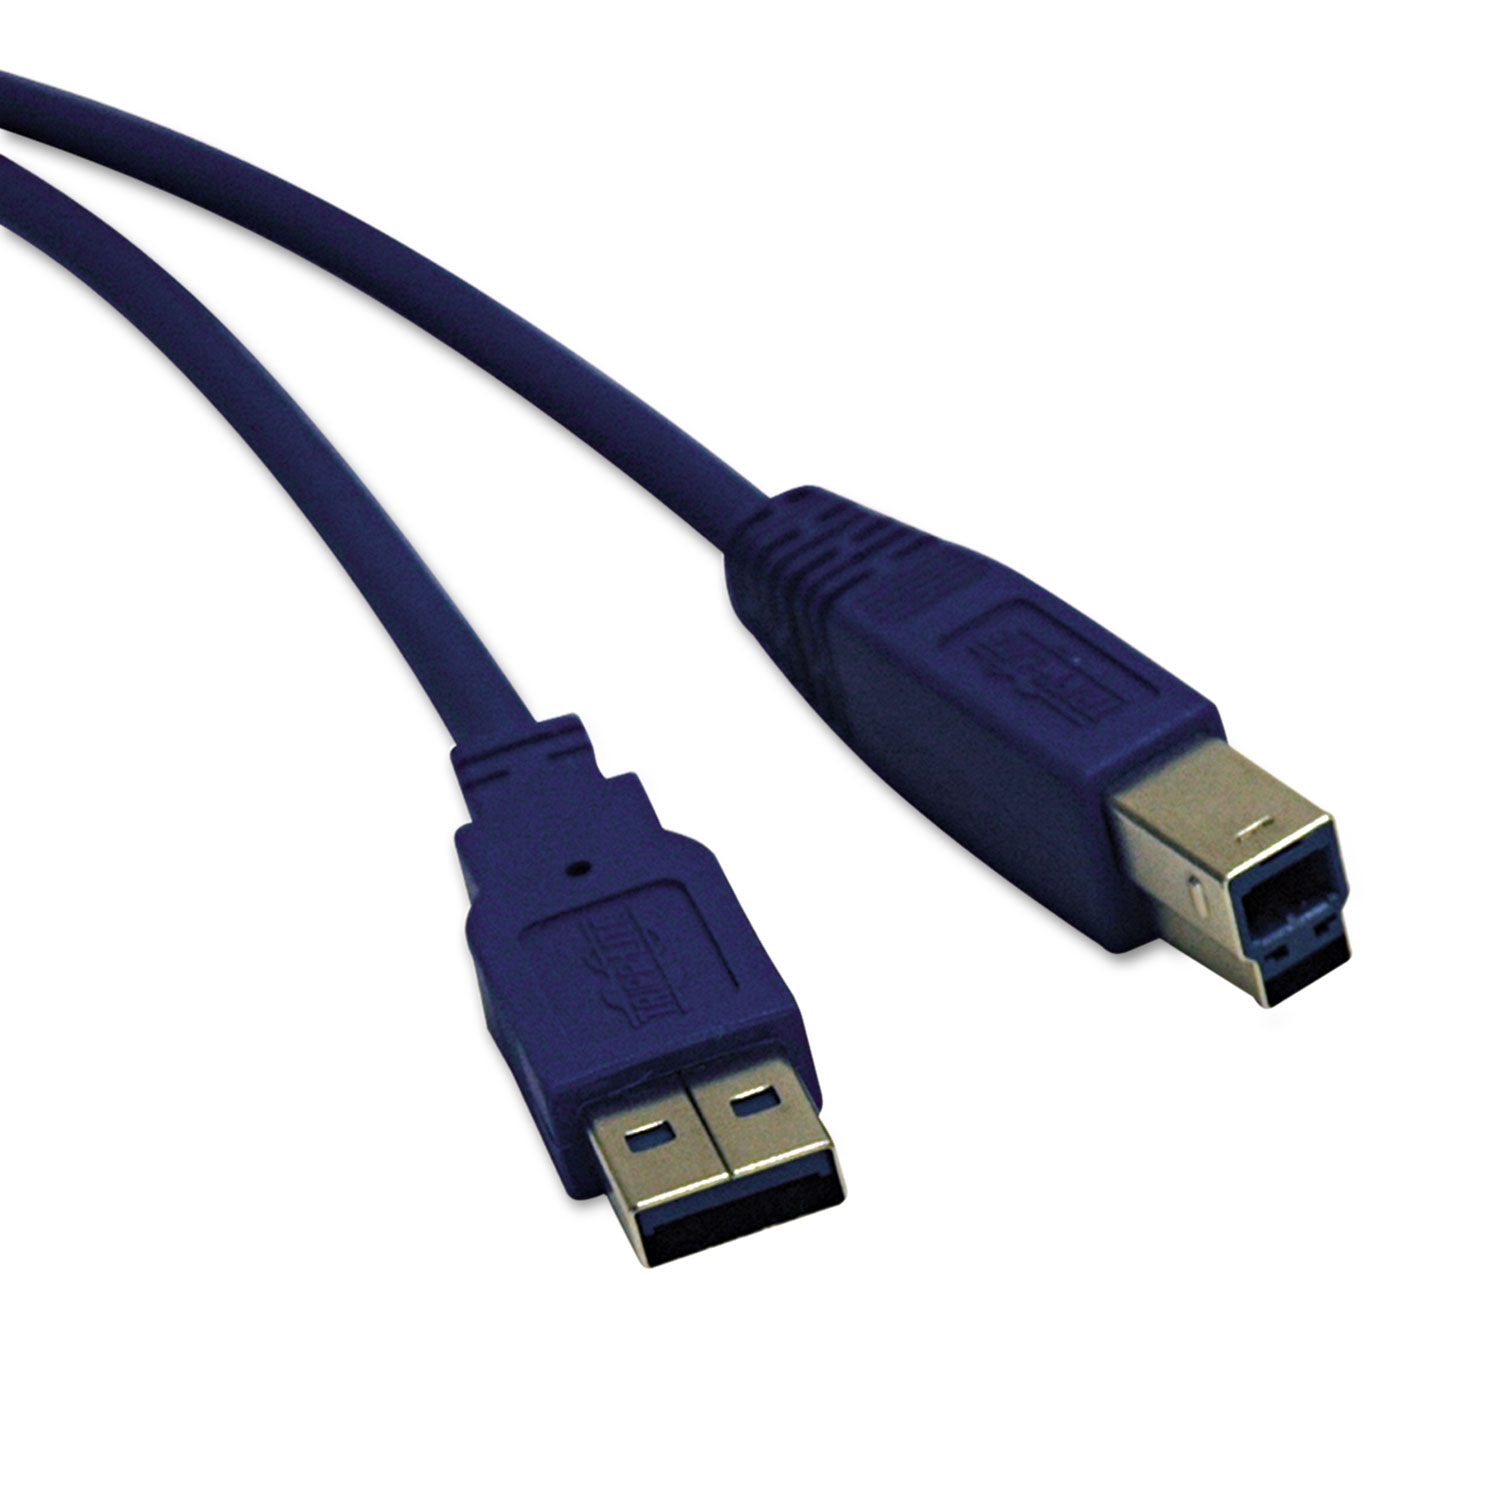 USB 3.0 Device Cable, 15 ft, Blue